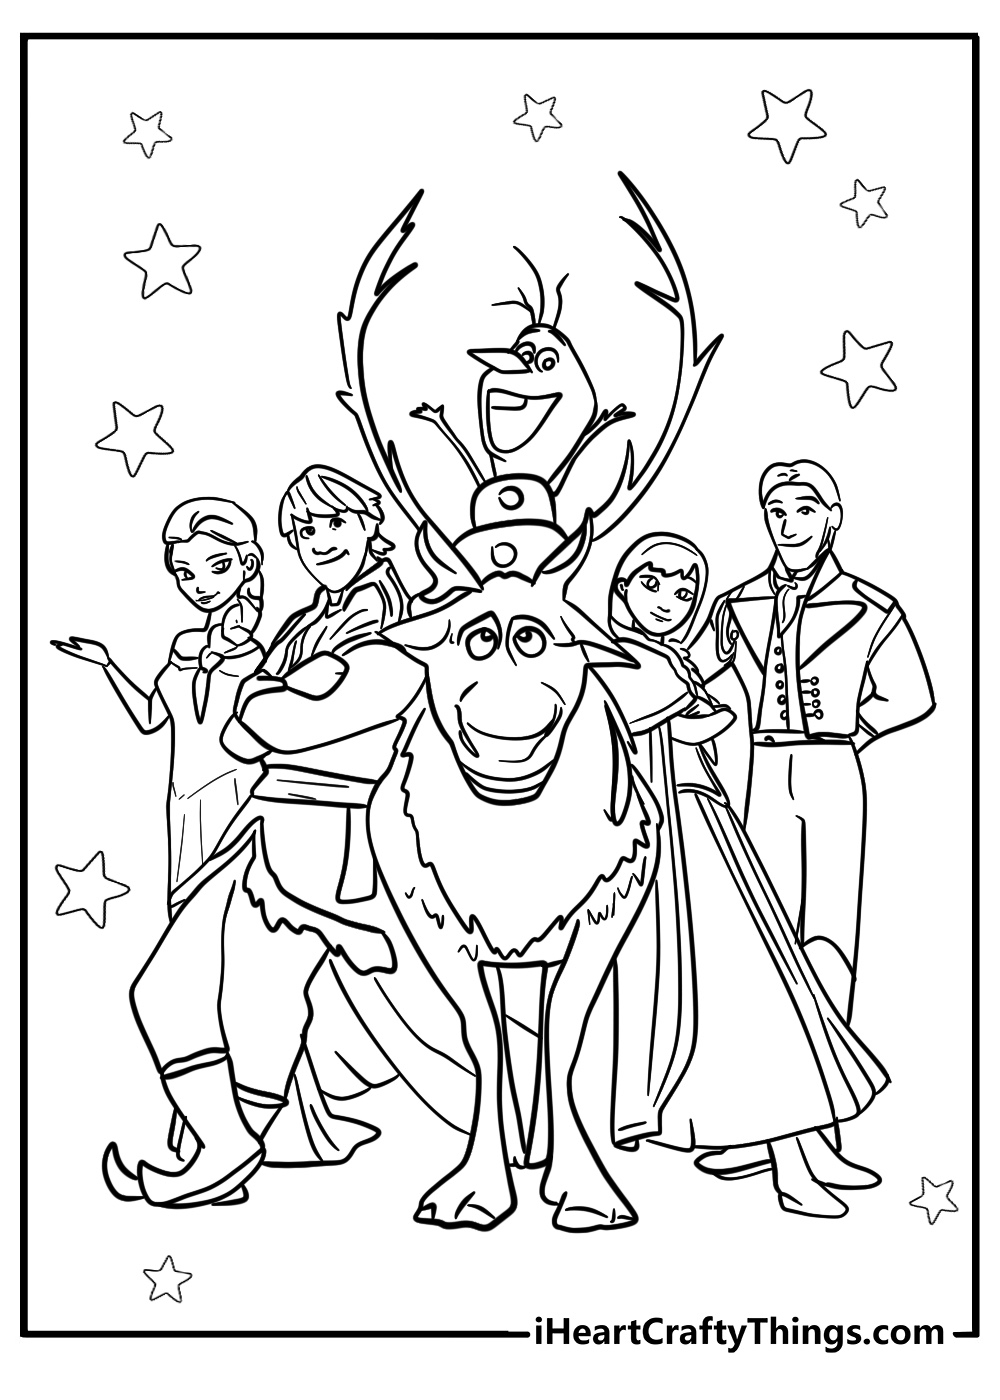 Frozen characters coloring pages